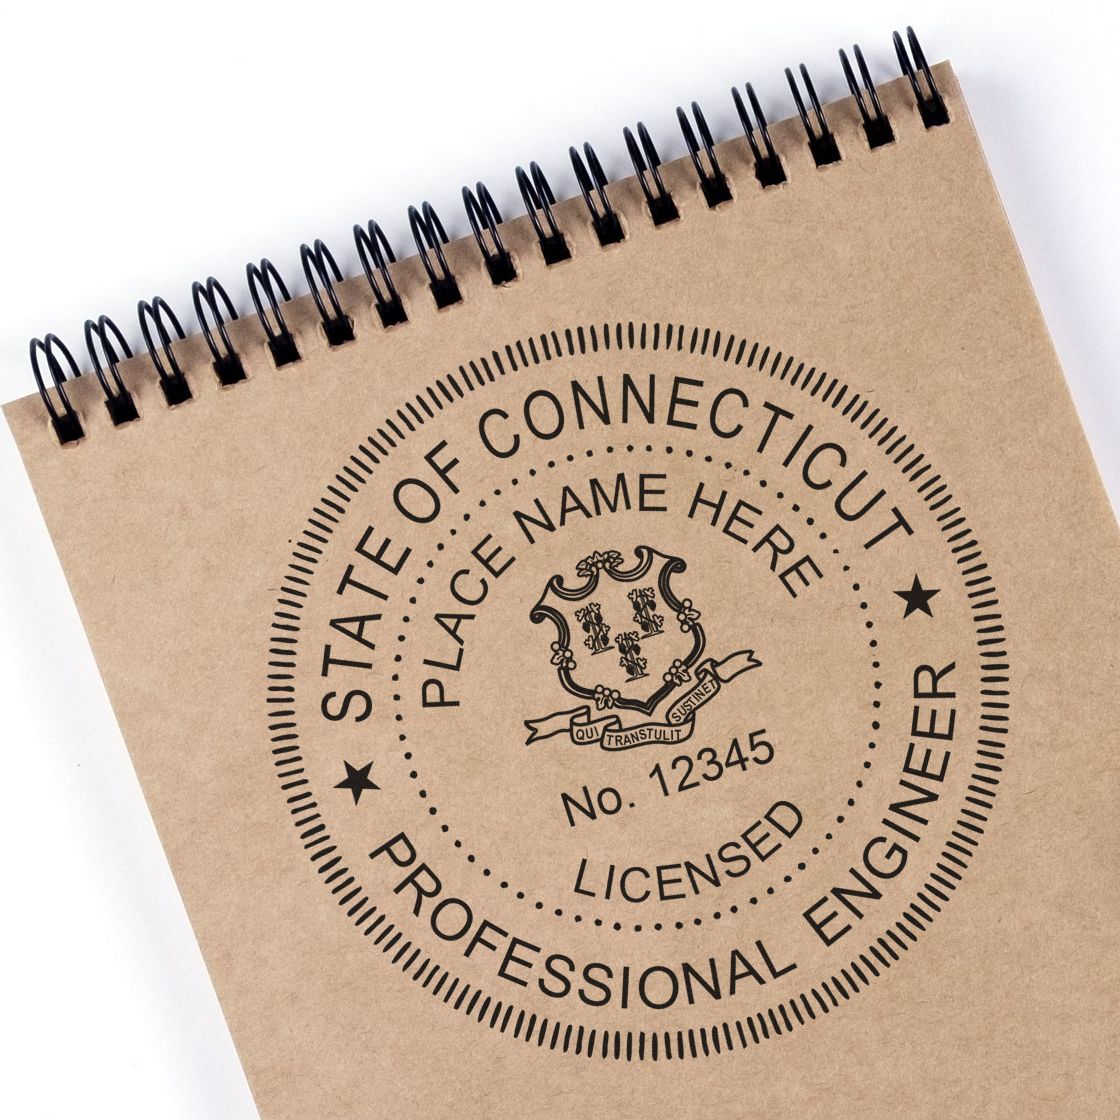 The main image for the Digital Connecticut PE Stamp and Electronic Seal for Connecticut Engineer depicting a sample of the imprint and electronic files